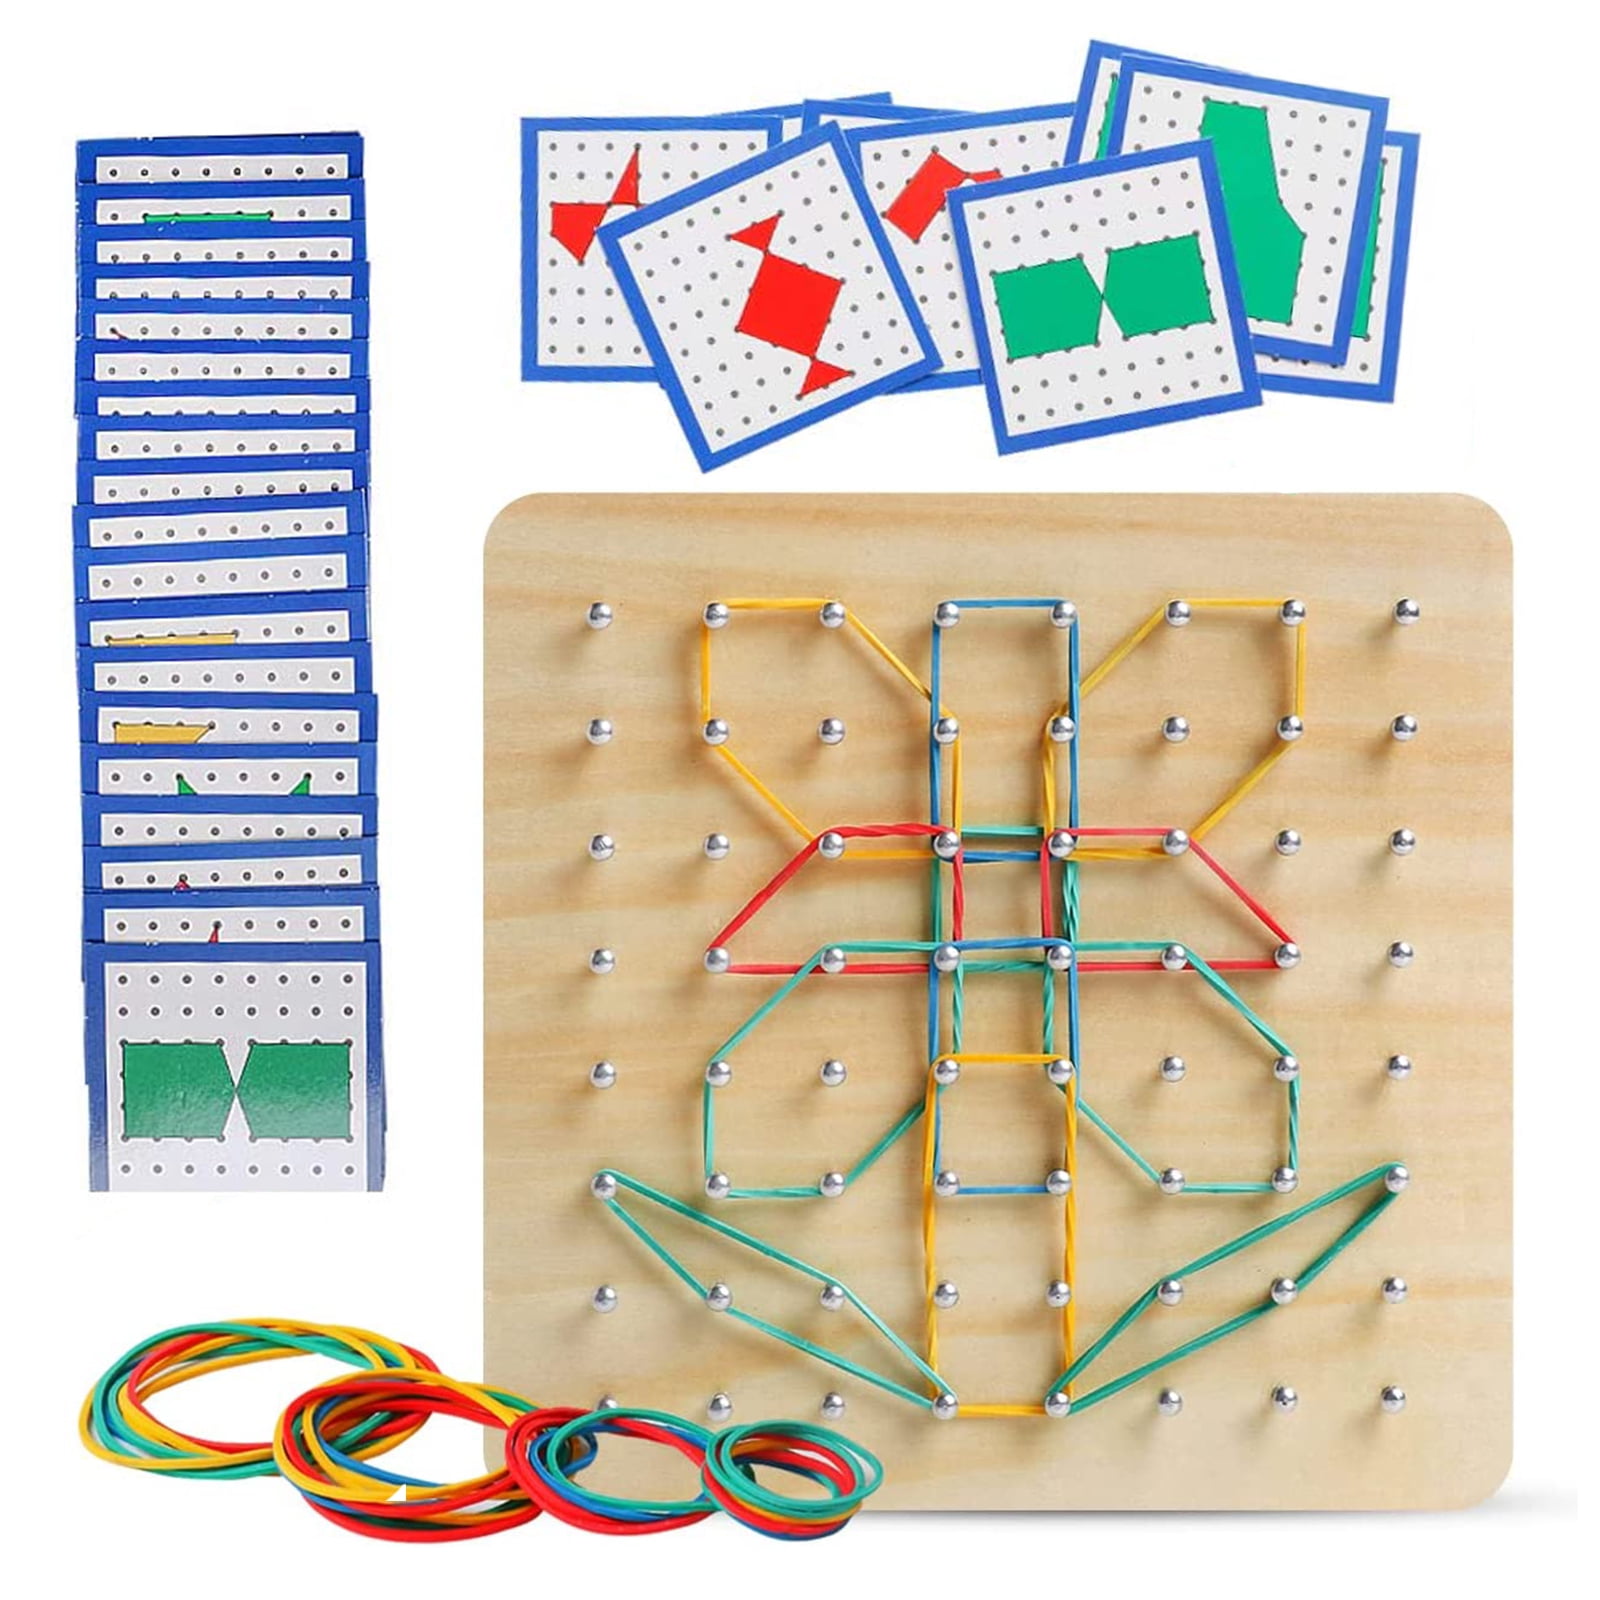 Wooden Montessori Geoboard Mathematical Manipulative Toy with Cards for Kids 